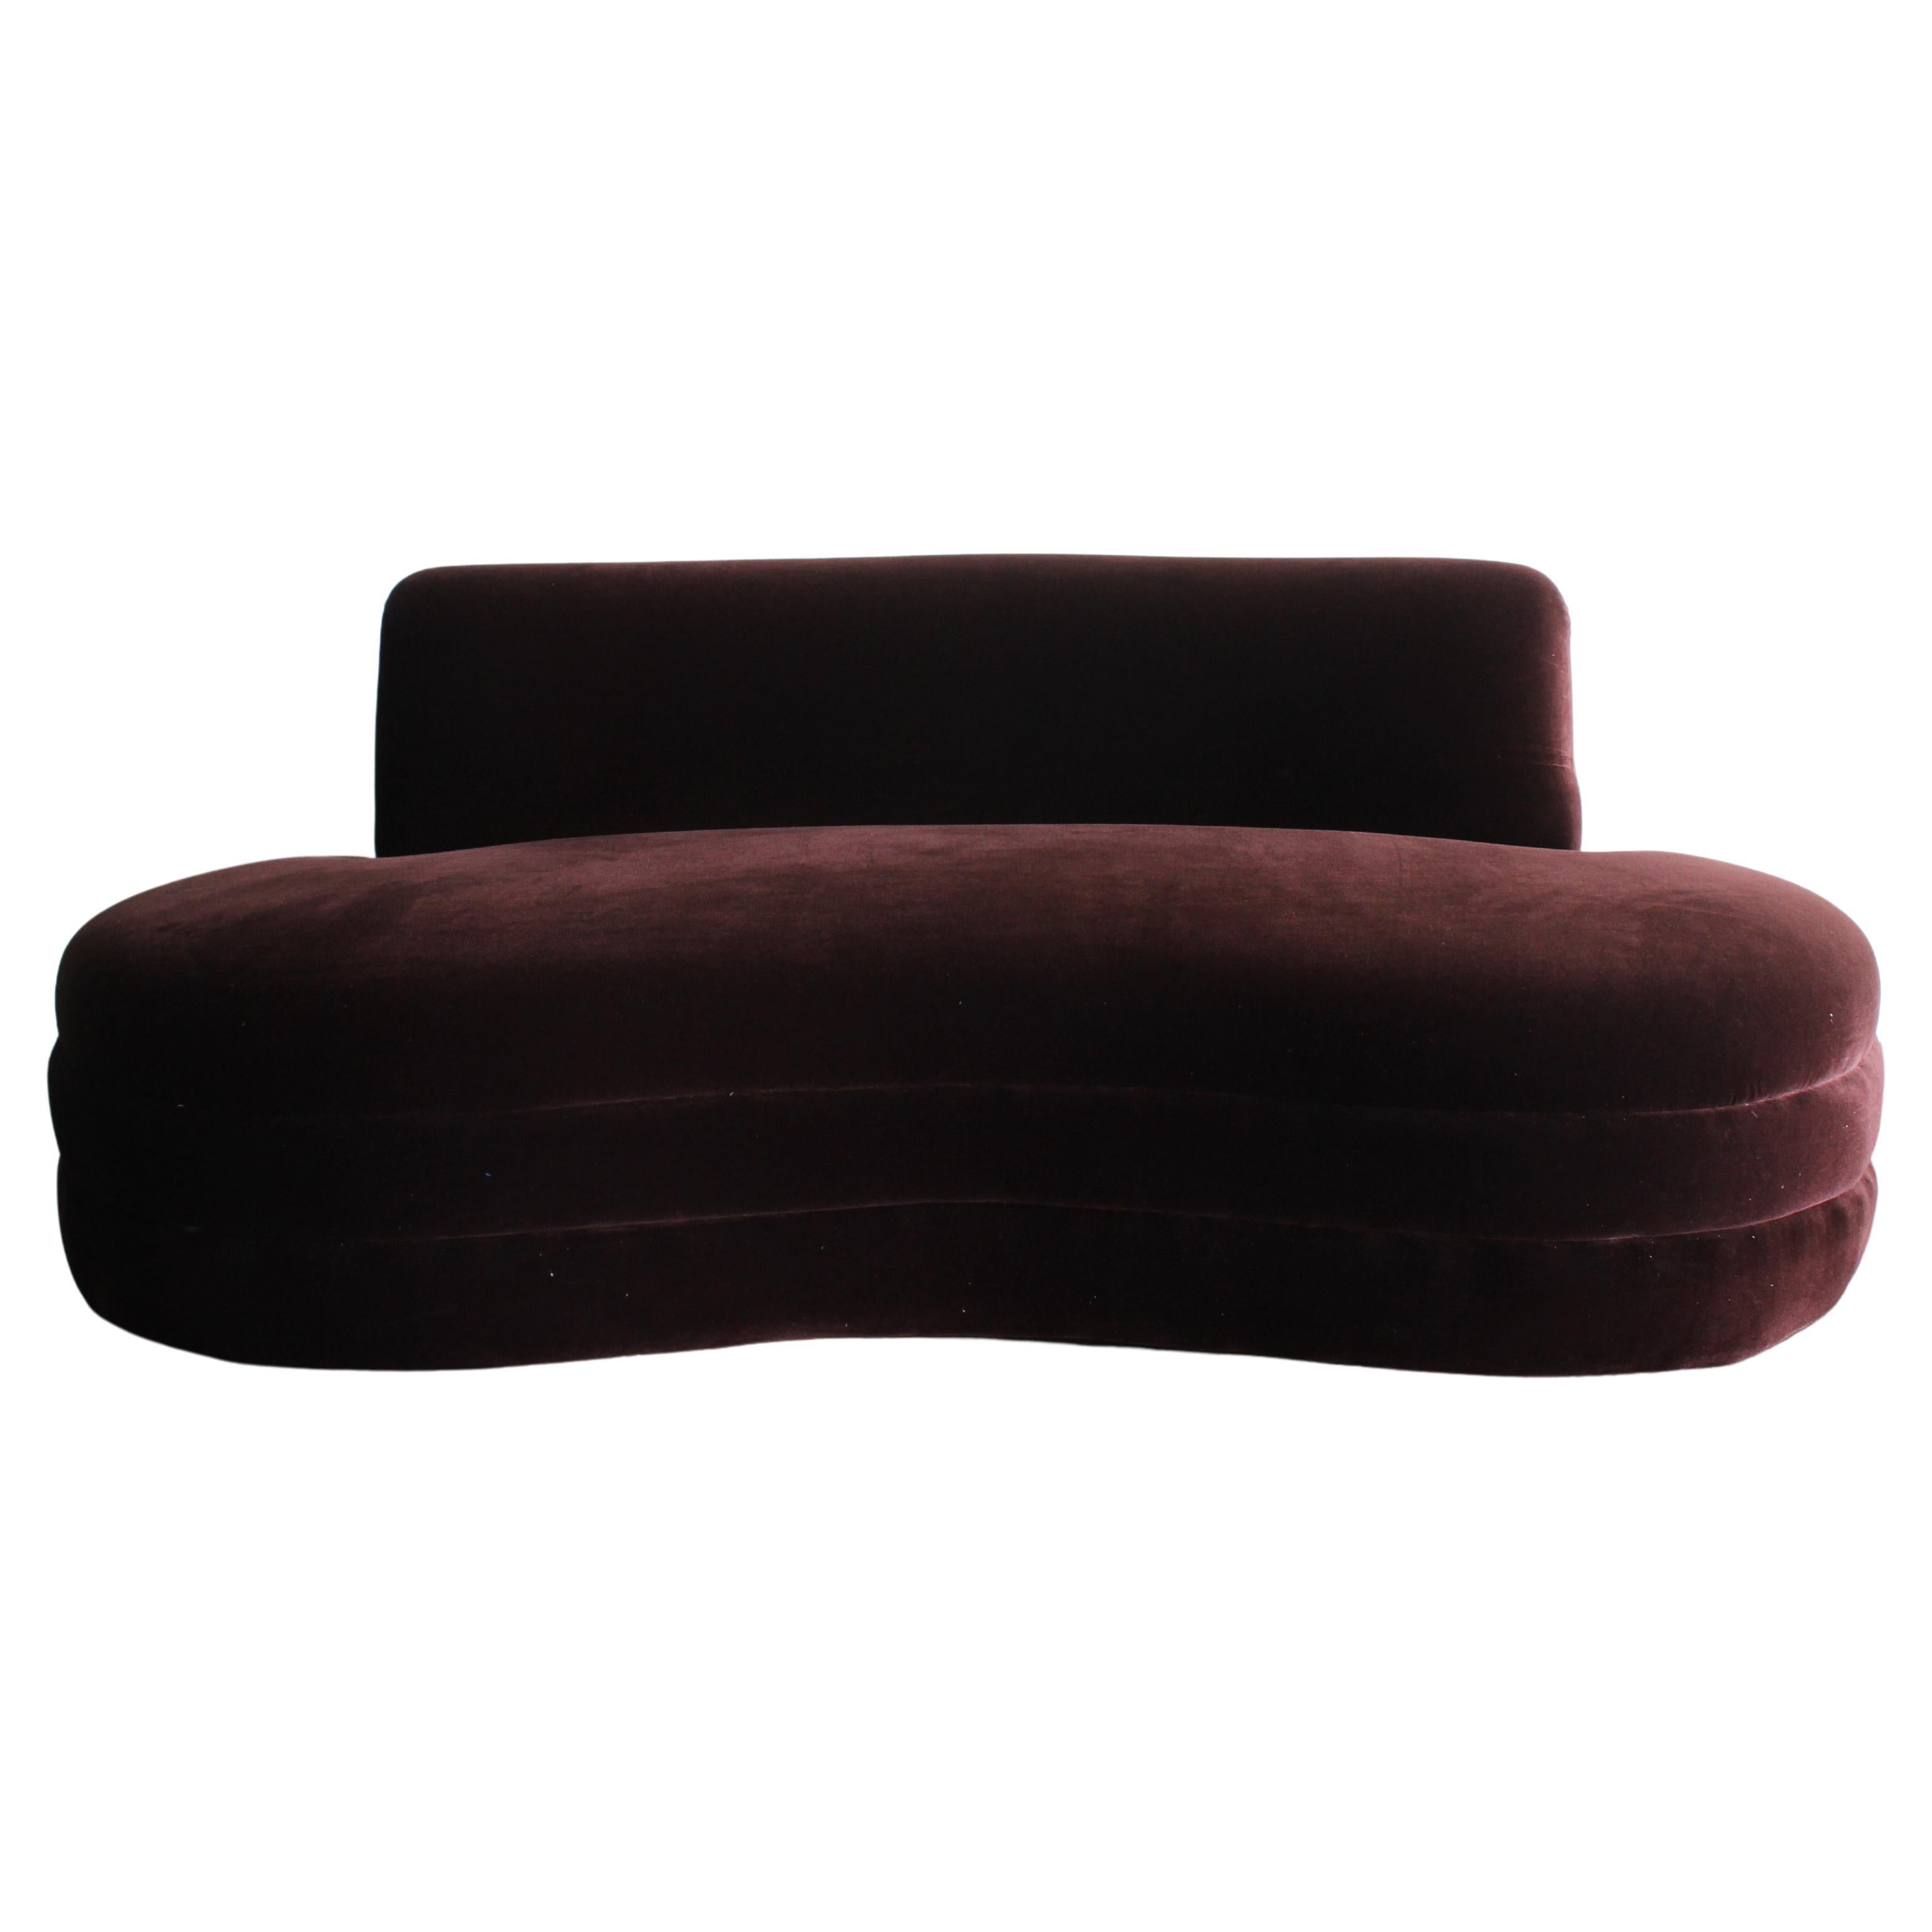 Curved Armless Sofa by Weiman in a Sensual Velvet Fabric